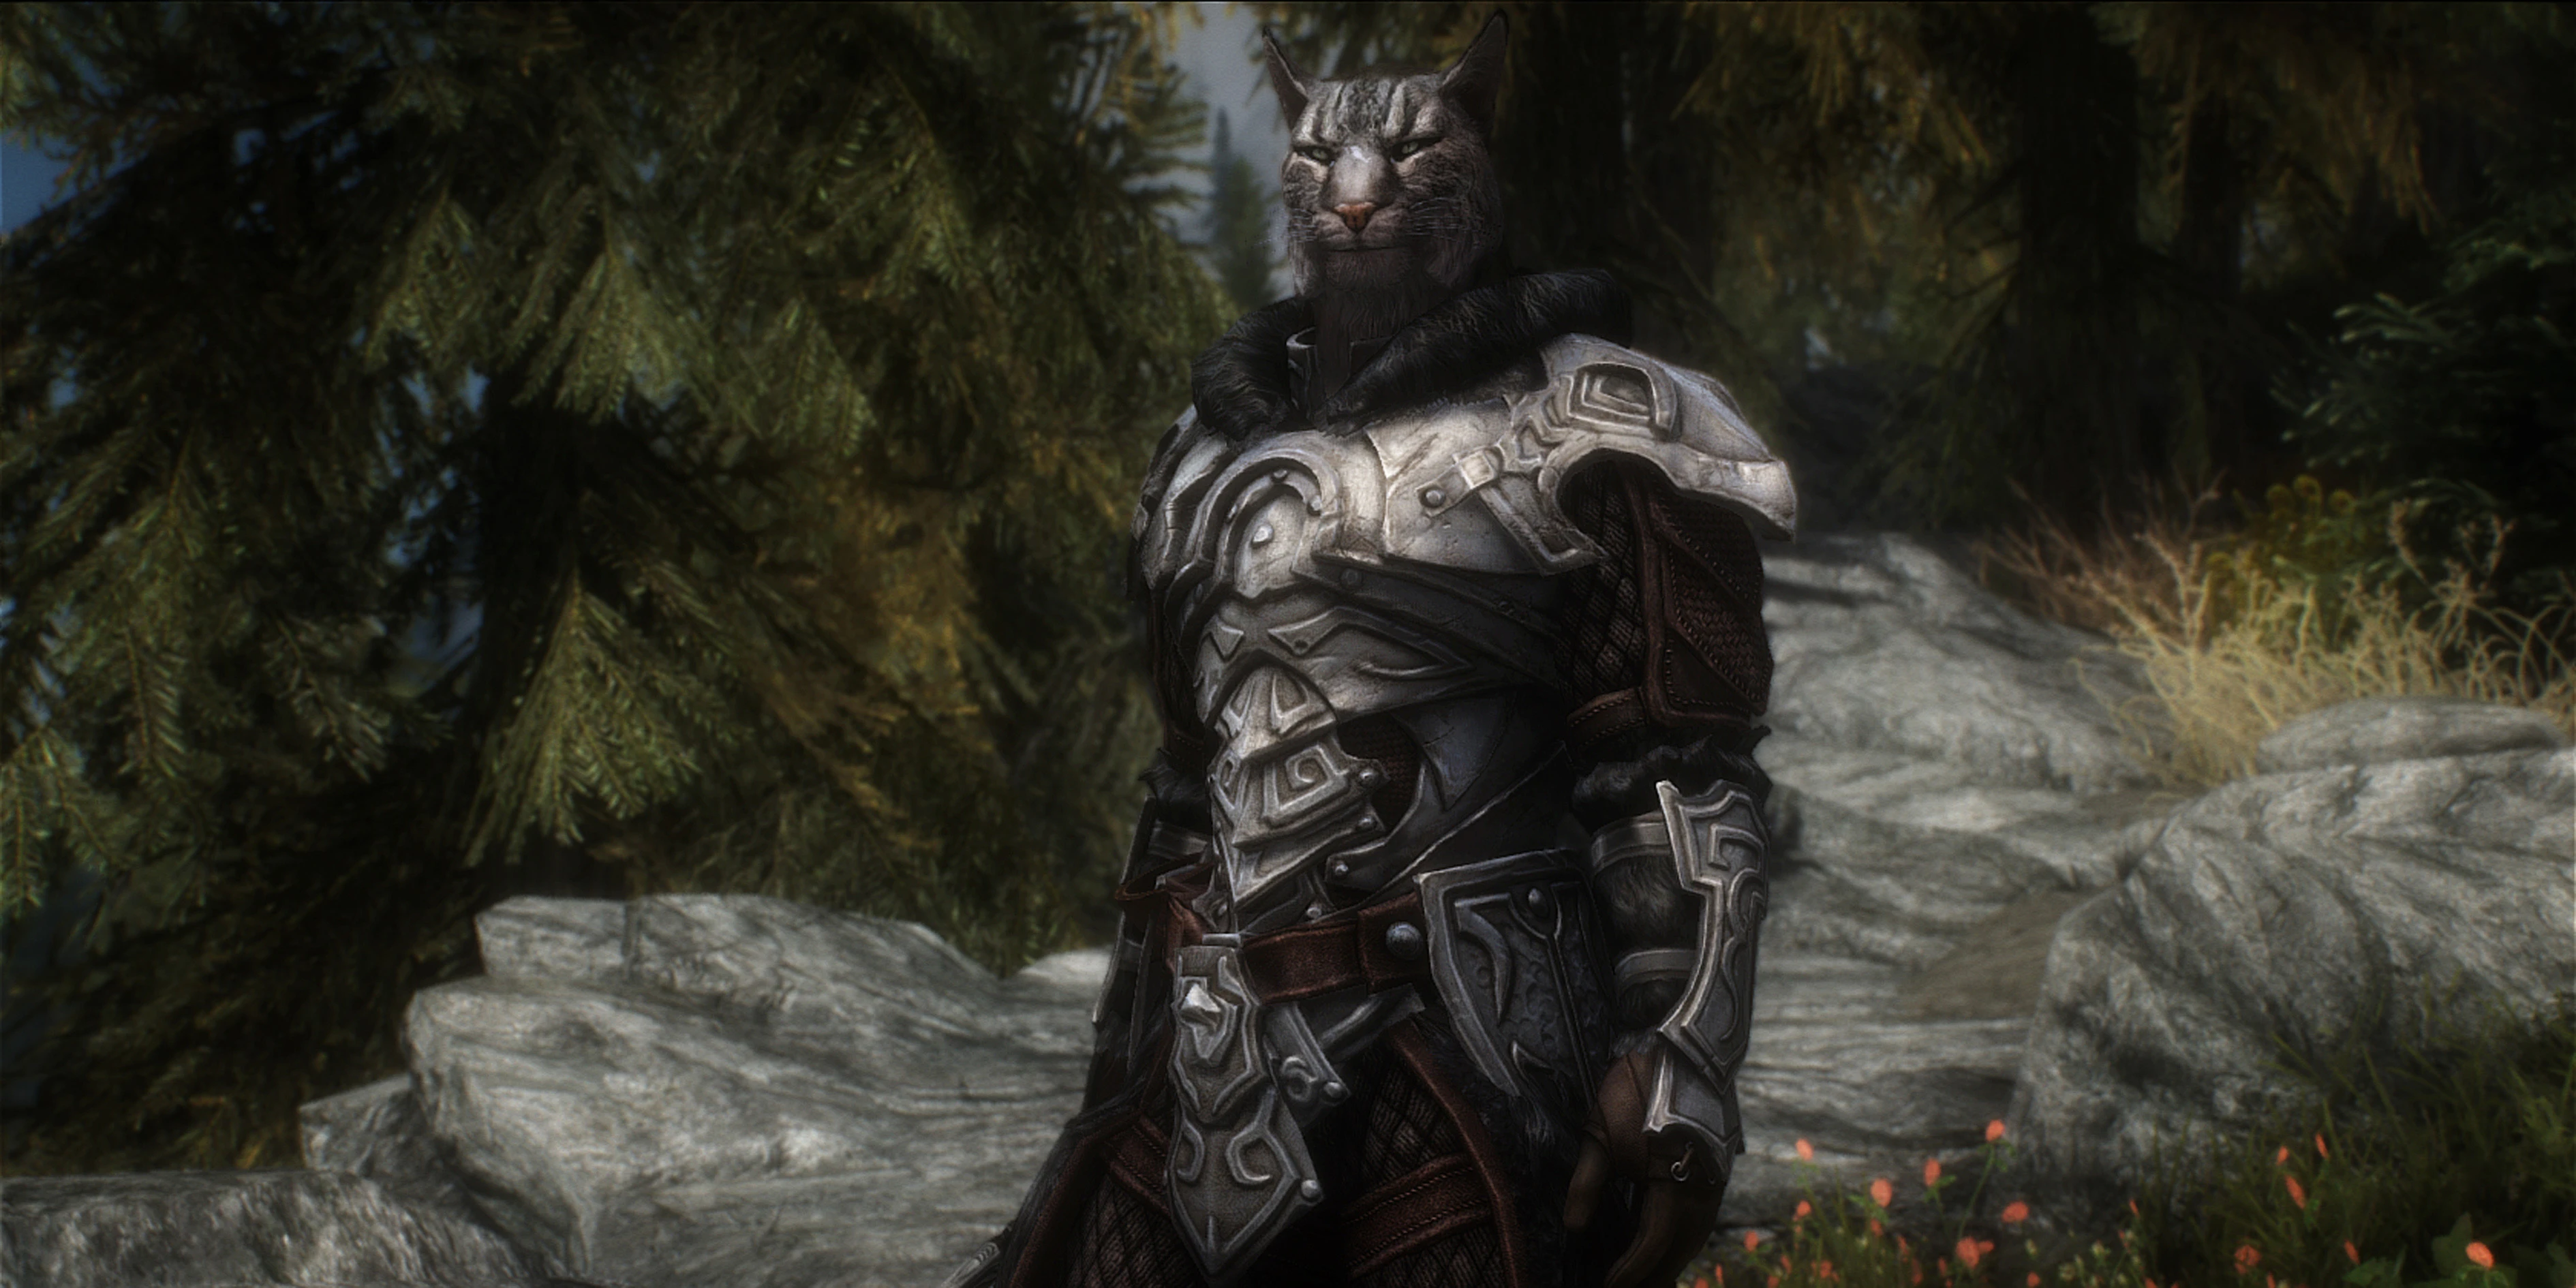 Nordic armor by Cabal.